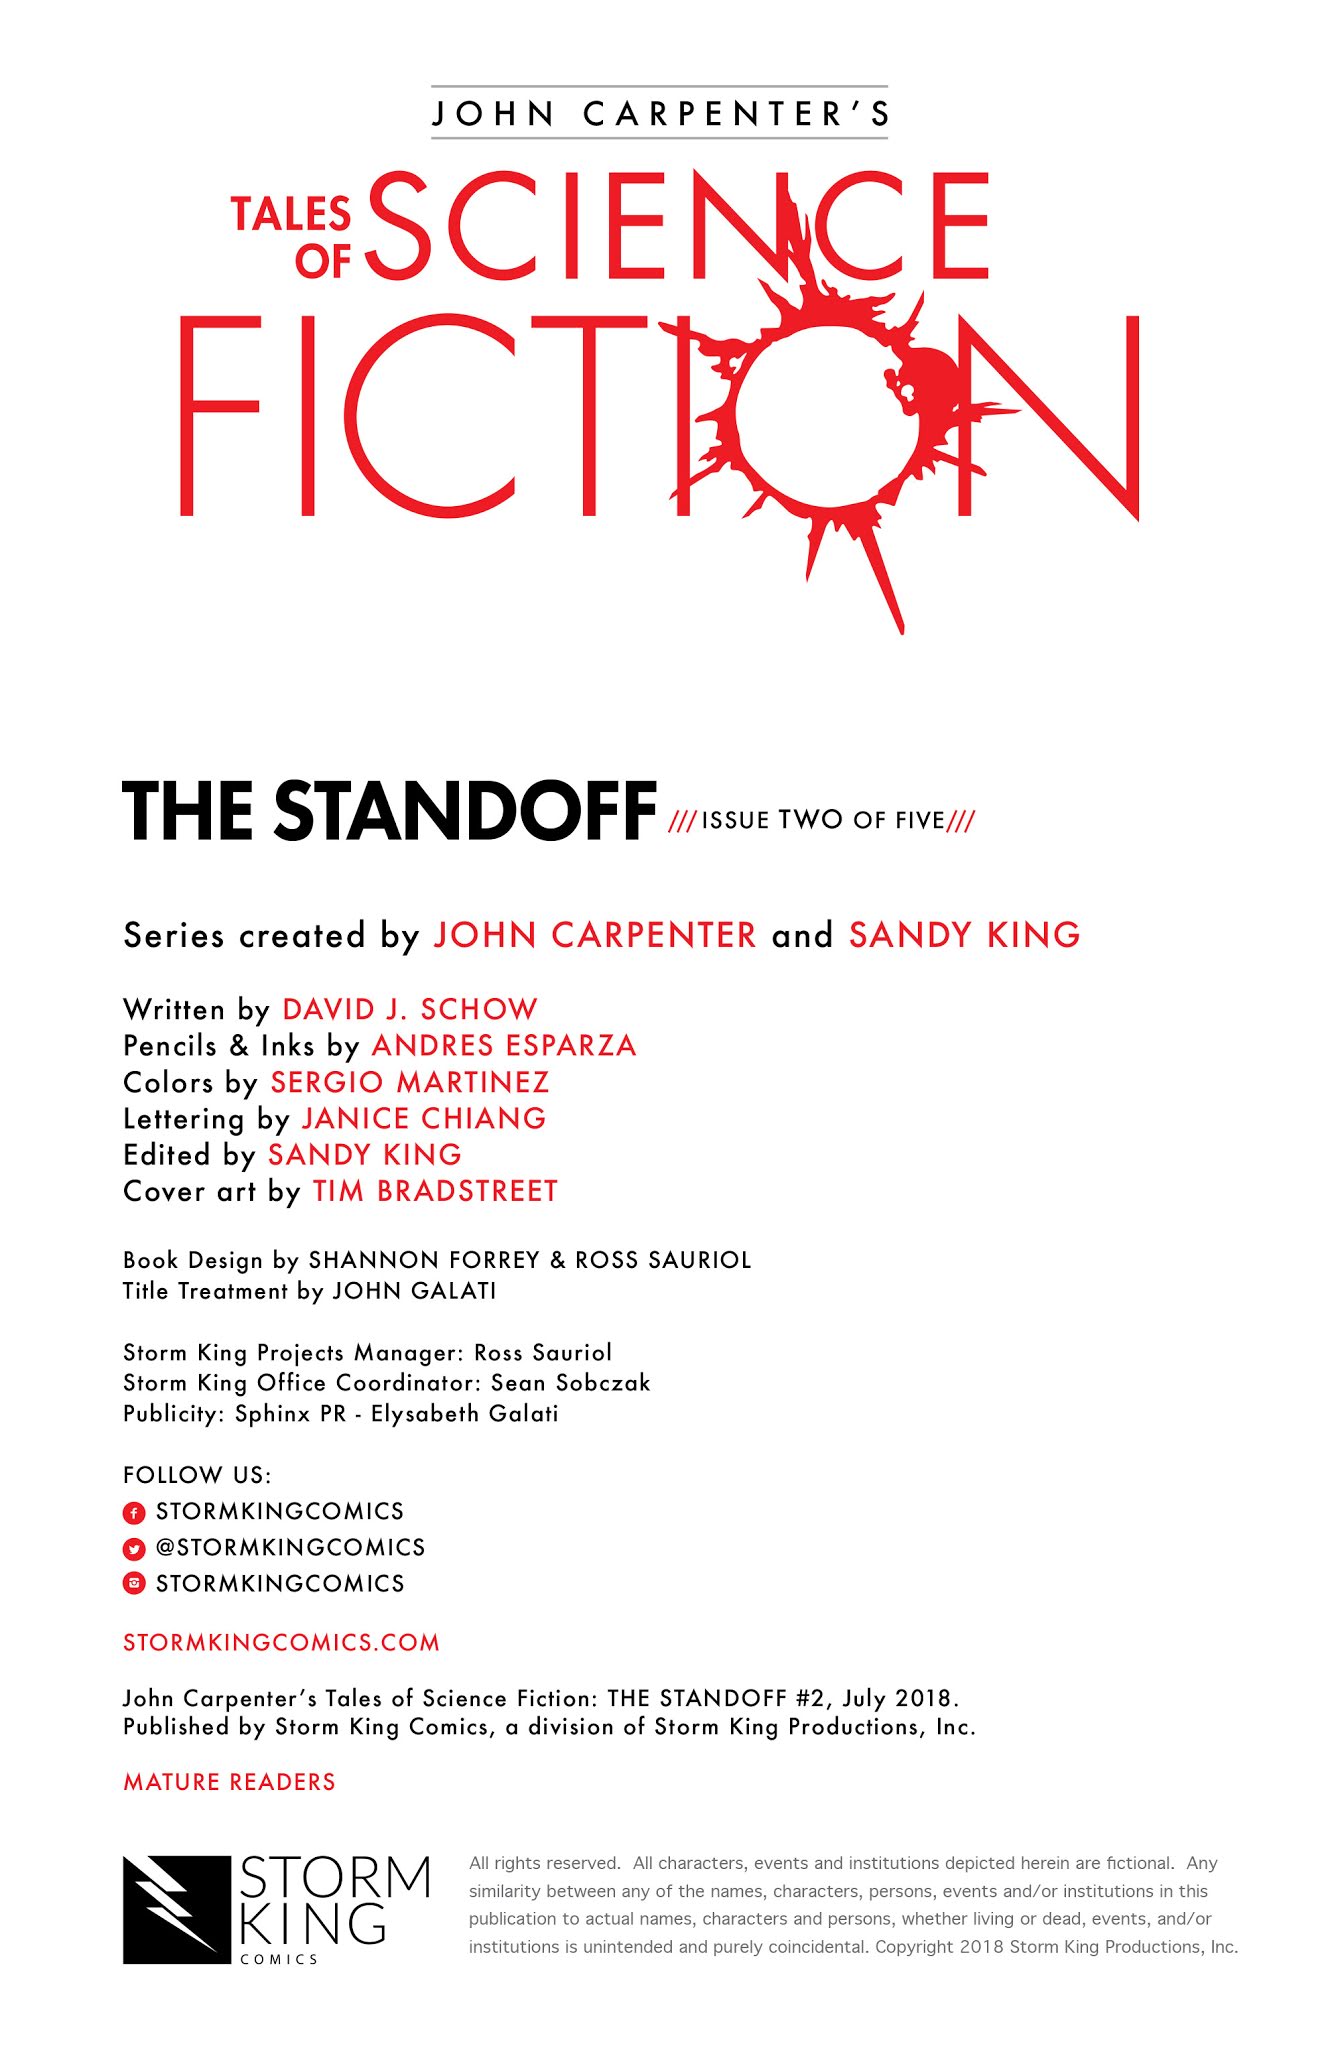 Read online John Carpenter's Tales of Science Fiction: The Standoff comic -  Issue #2 - 2